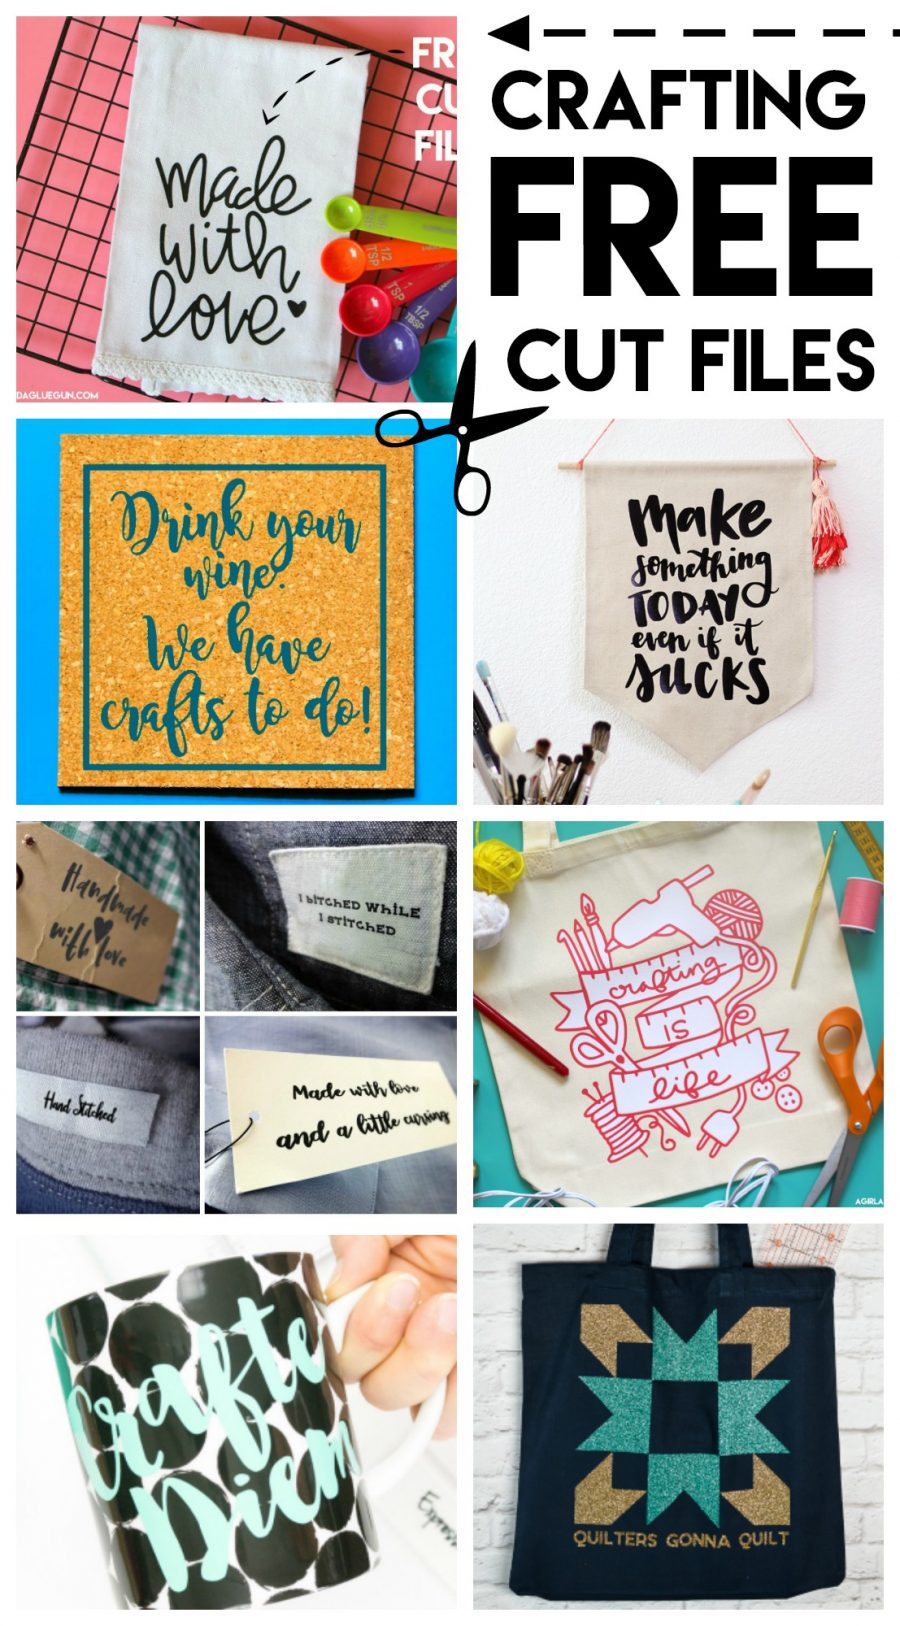 FREE crafty-themed cut files - they are great for decorating your craft space or gifting to a friend!